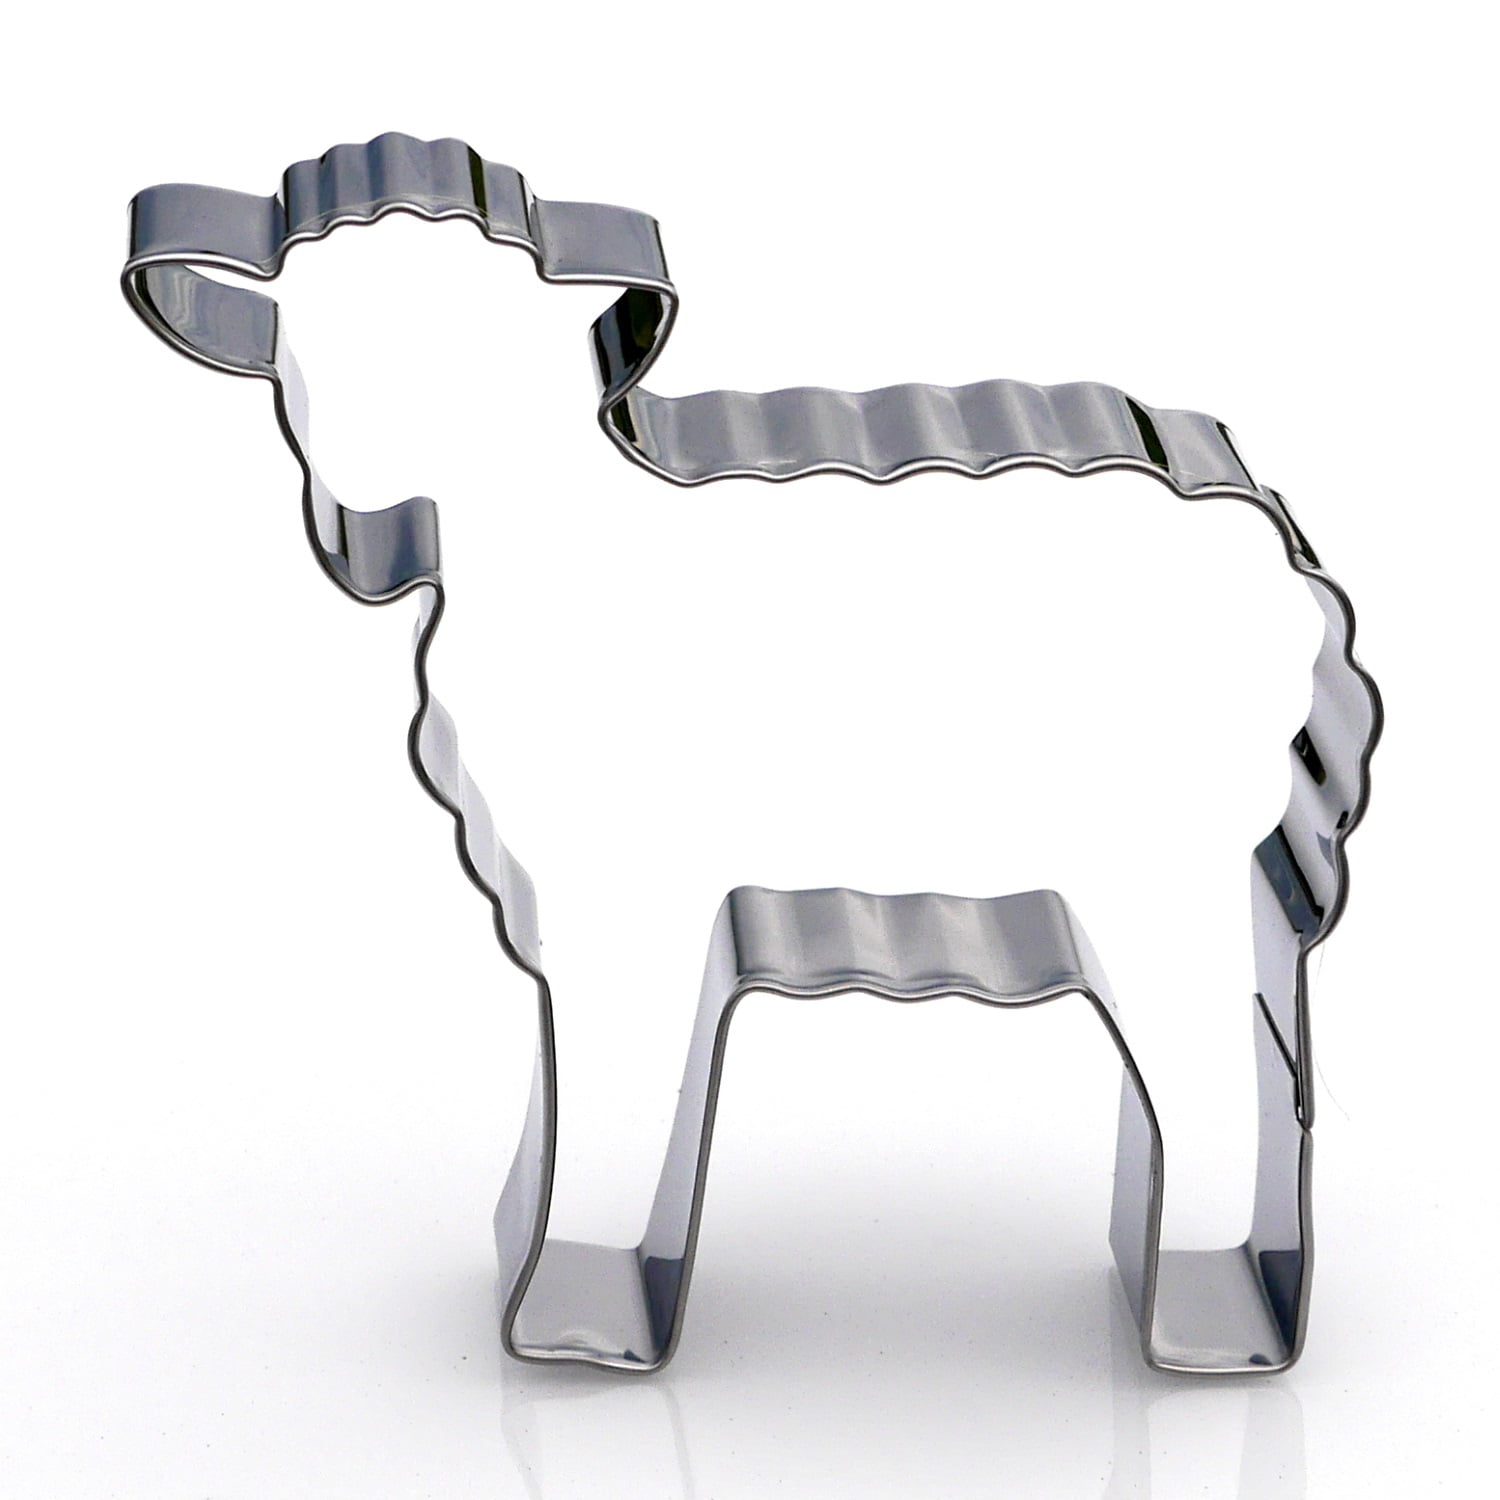 Lamb Cookie Cutter Animal Farm Easter